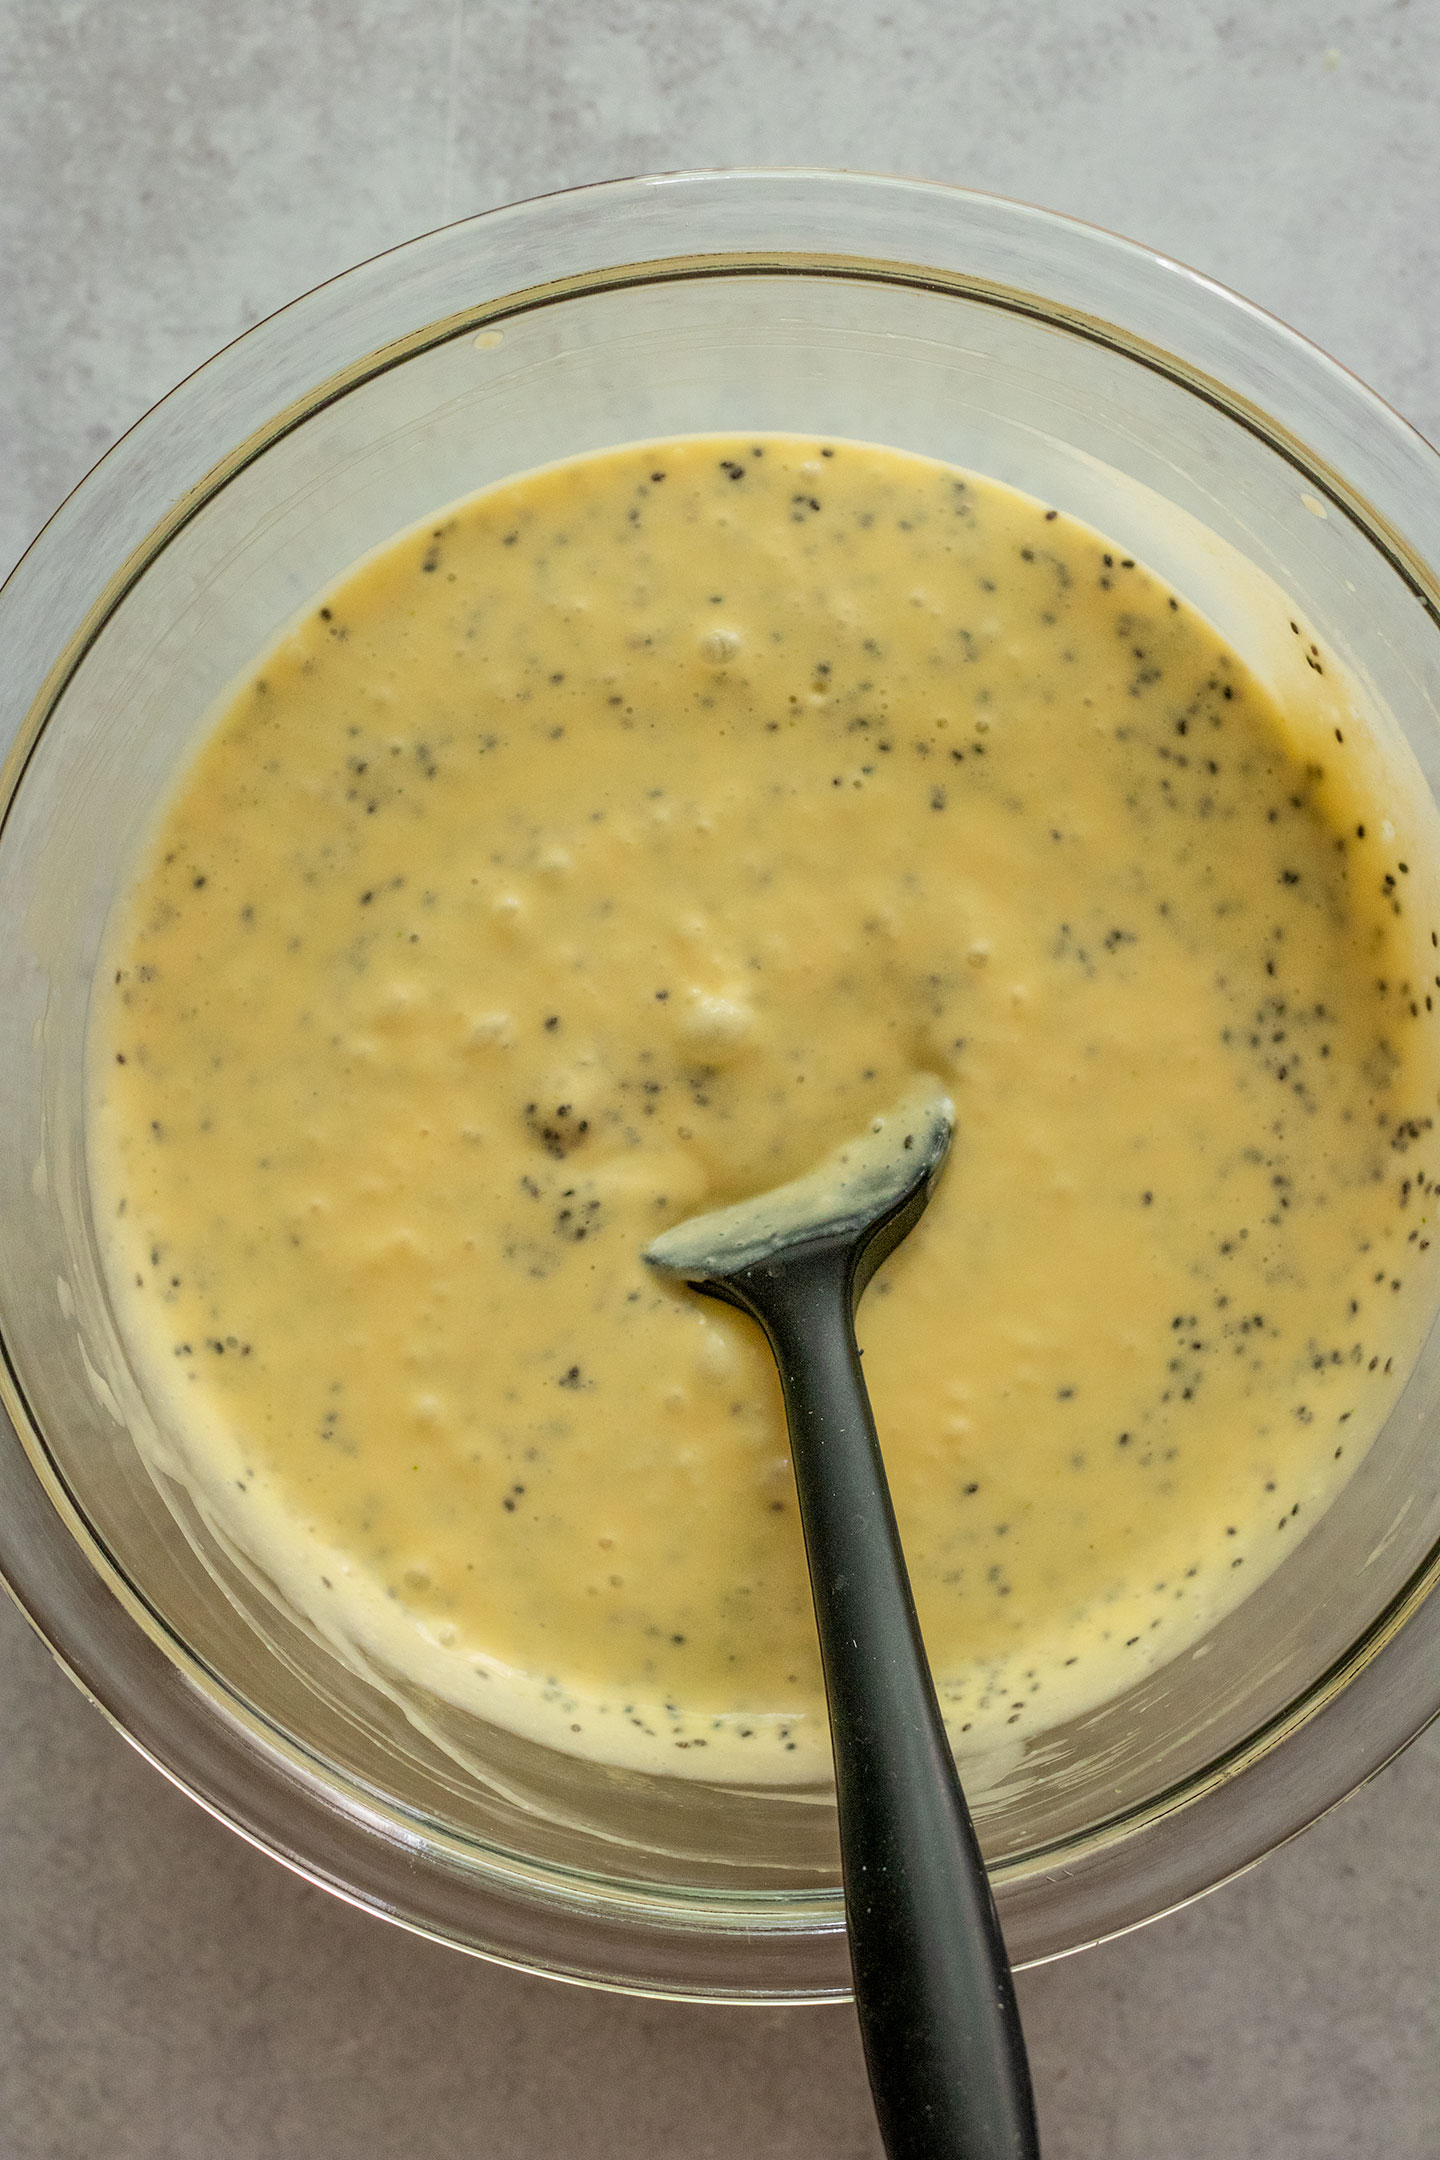 Mixing the chia seeds and mango milk together in a bowl.